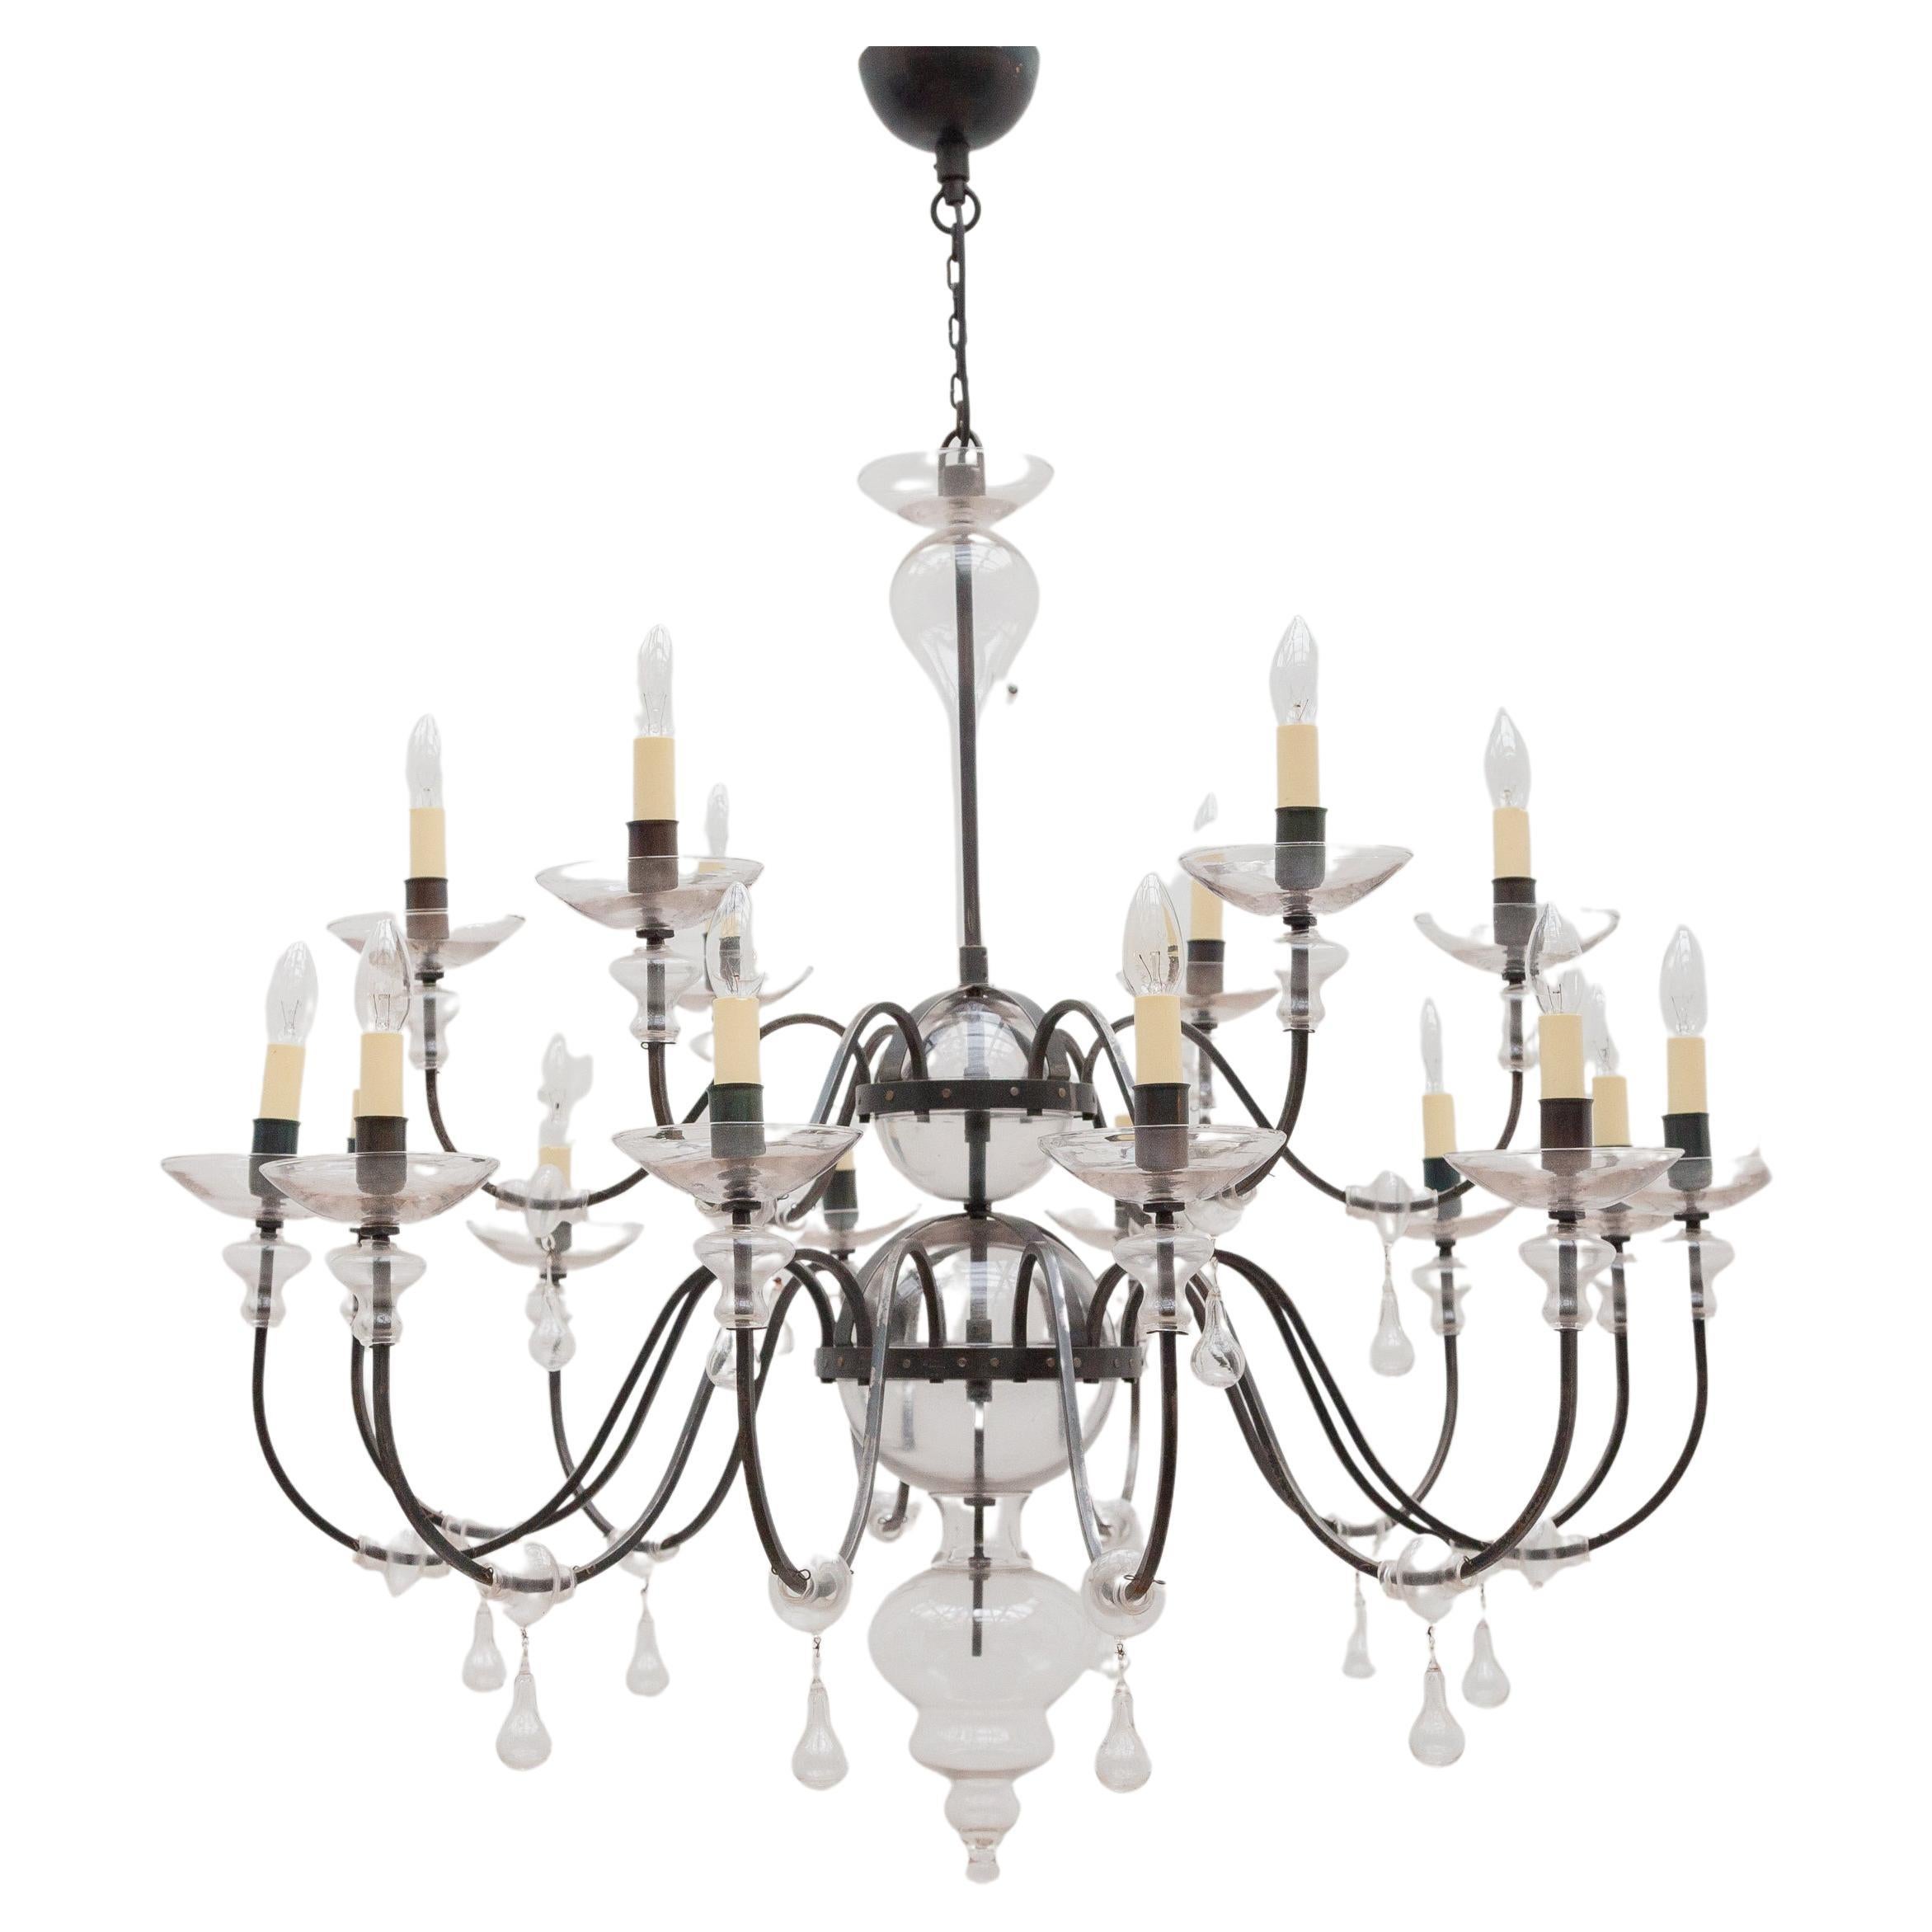 Large Brutalist Classic Wrought Iron Chandelier Designed by Günther Lambert